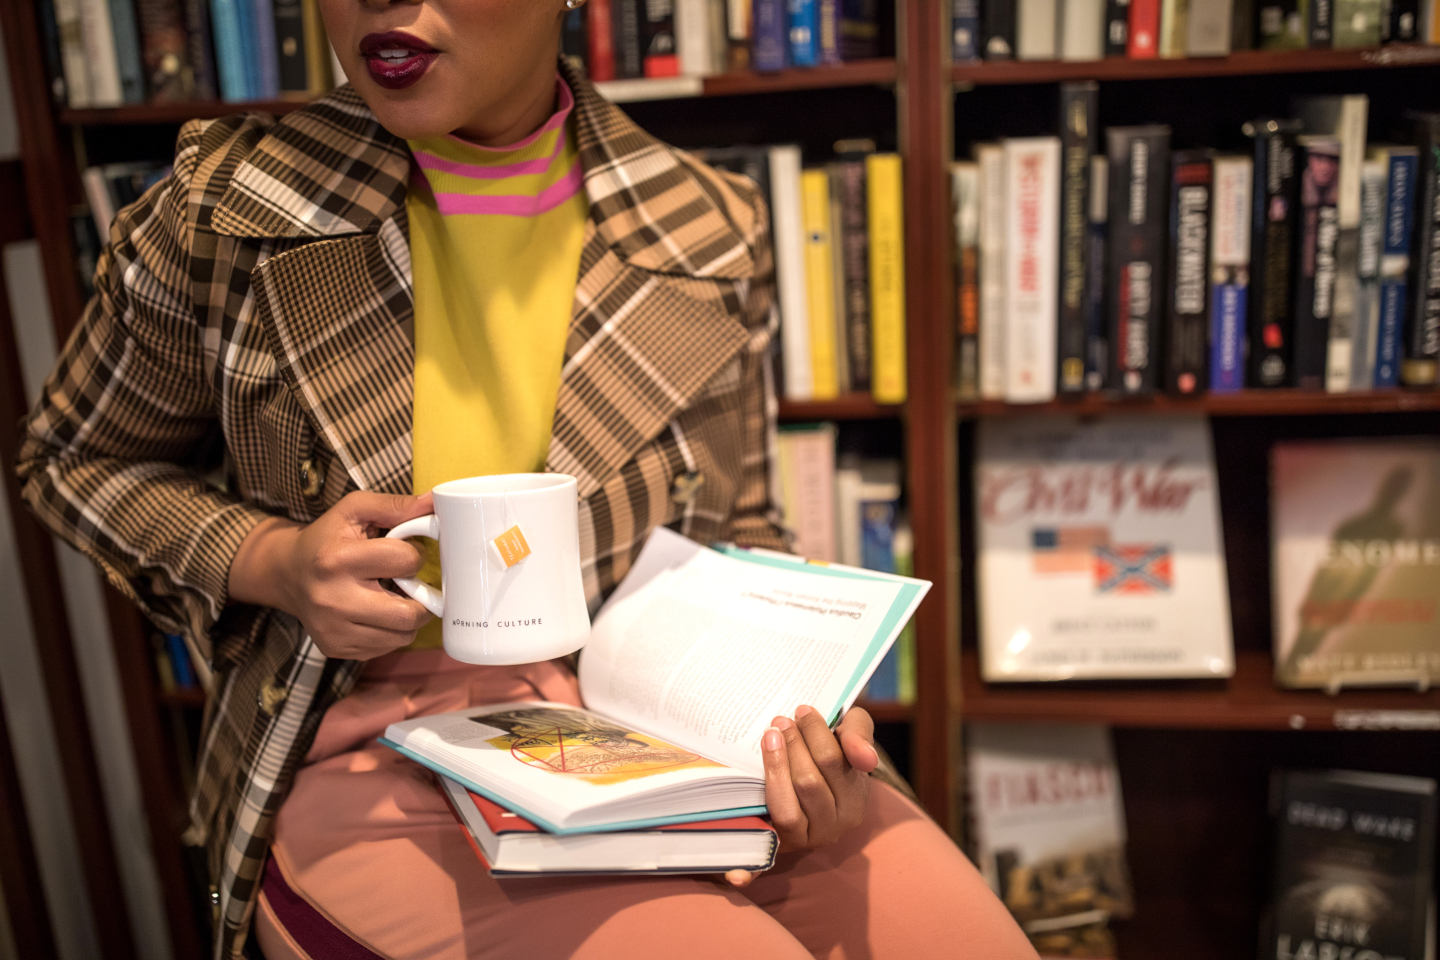 Library Plaid Coat ASOS Sweater and Pink Puma Pants Reading List